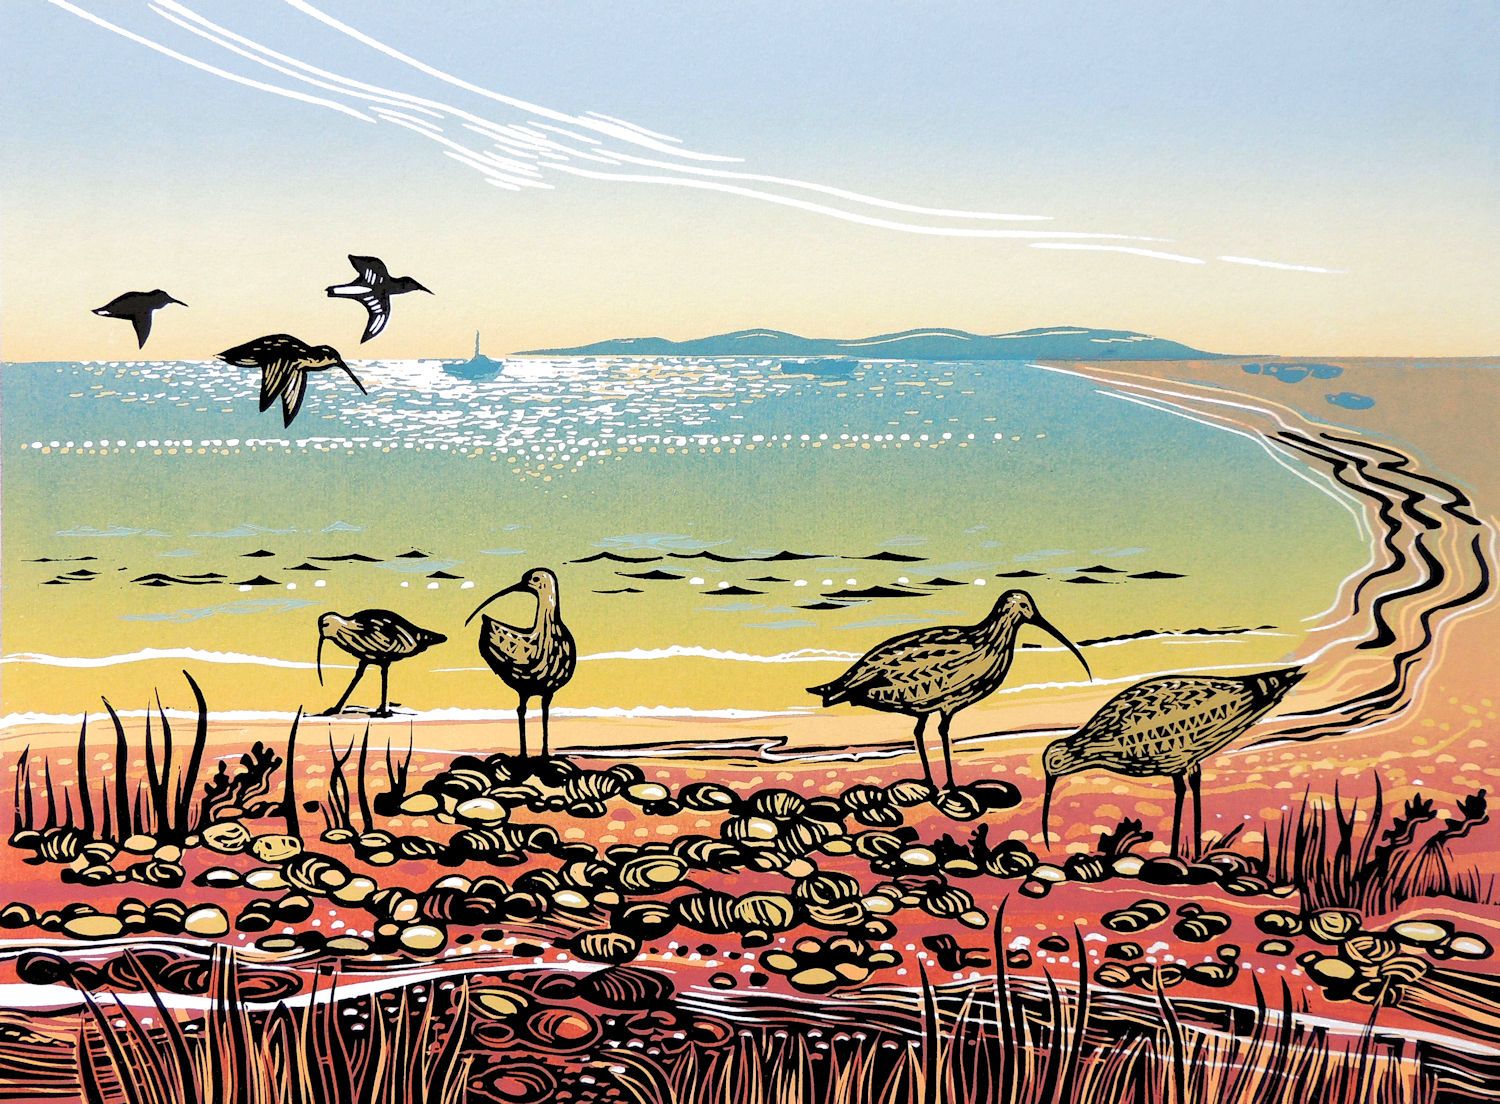 Curlews on the Coast by Rob Barnes